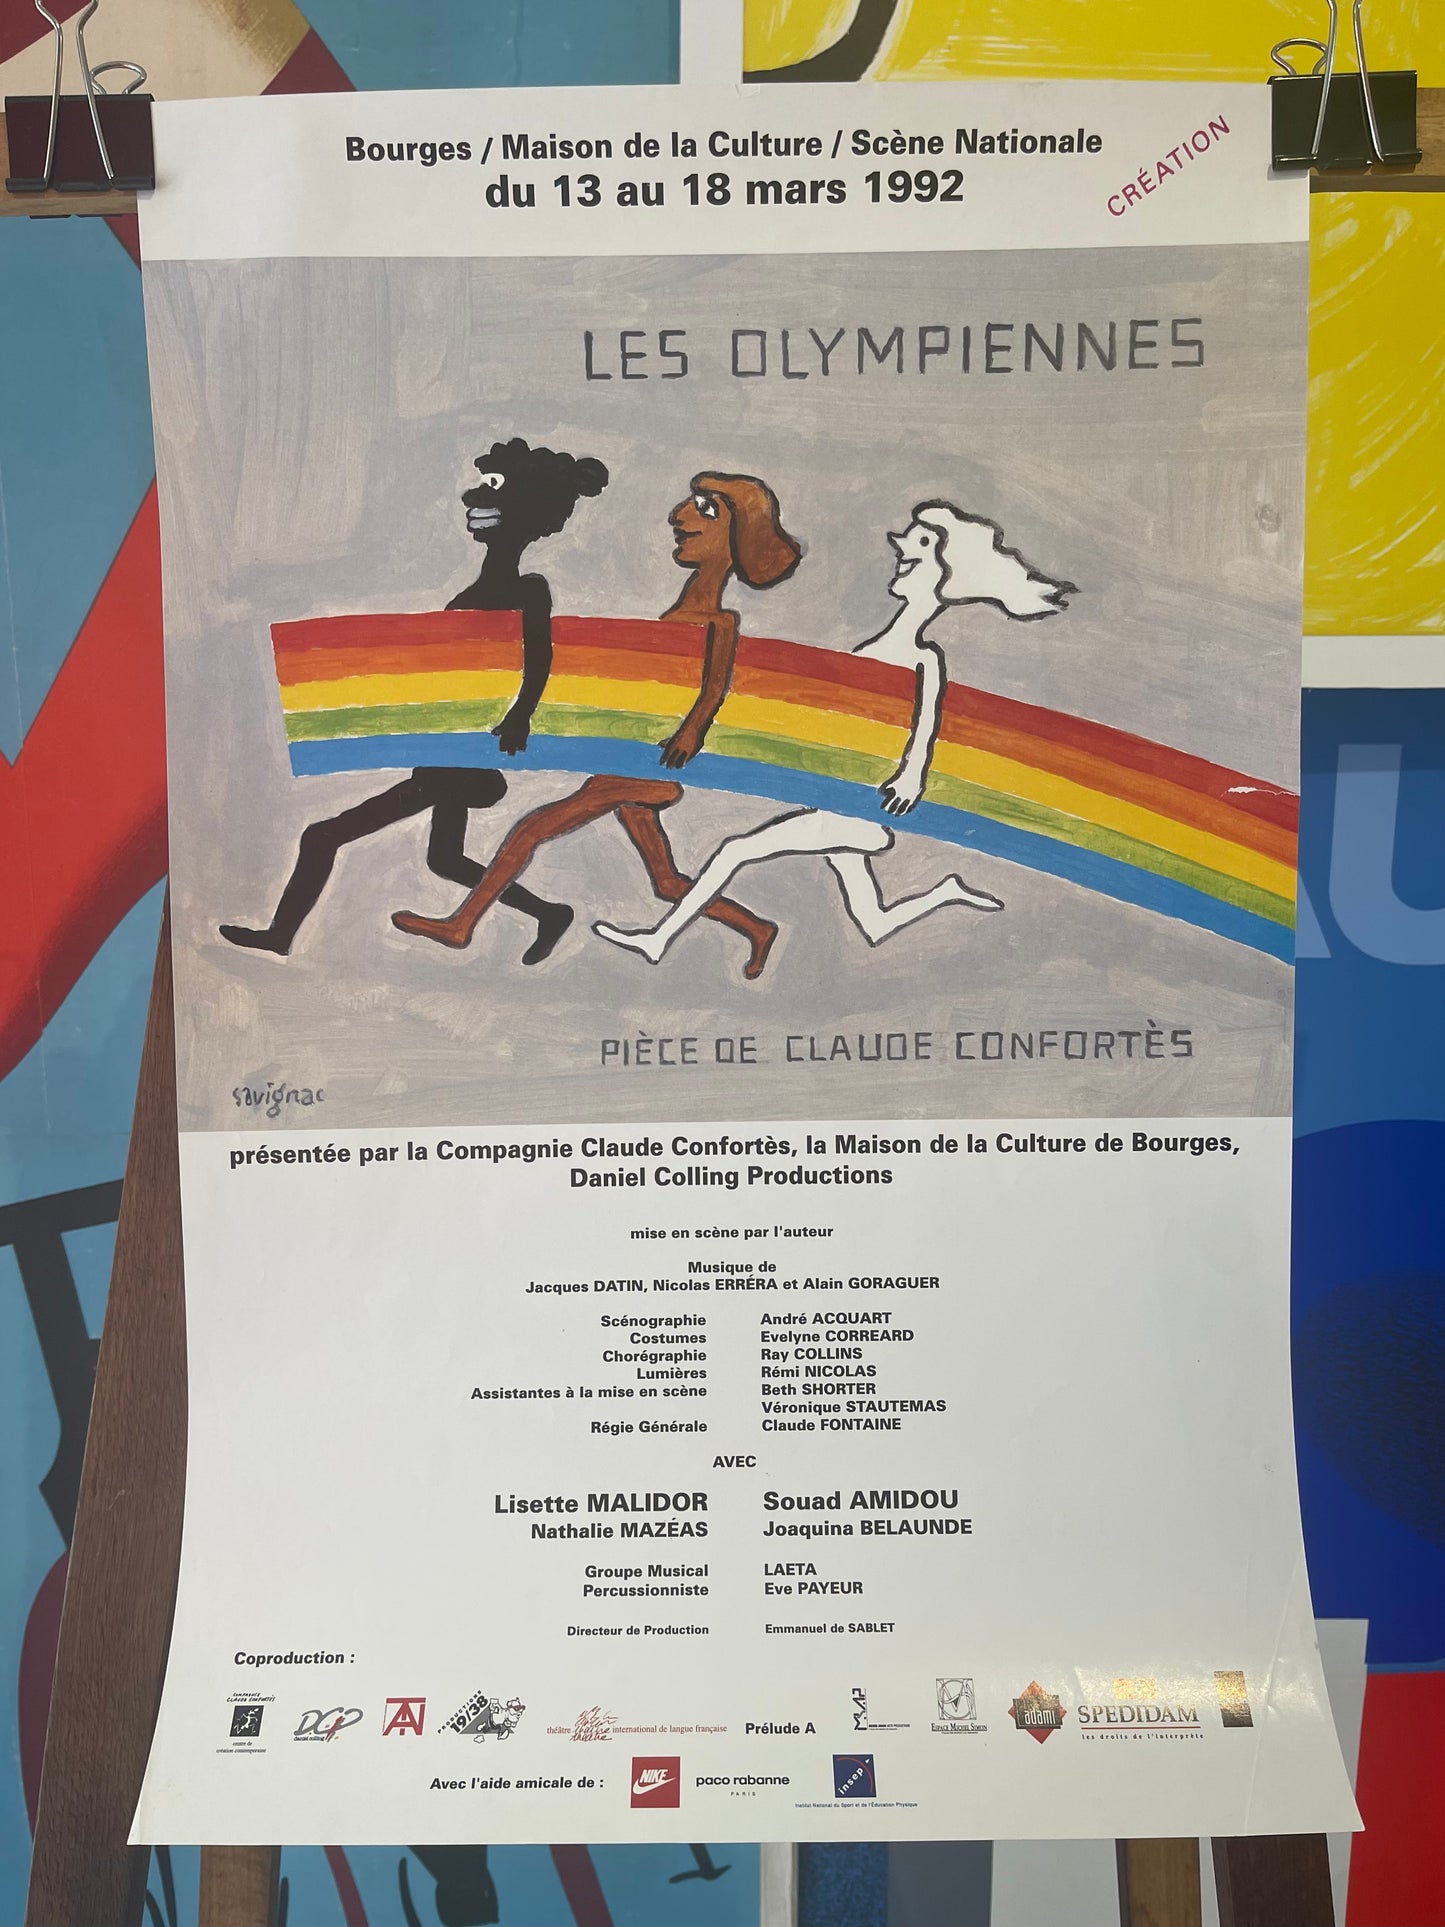 Les Olympiennes Exhibition Poster by Savignac